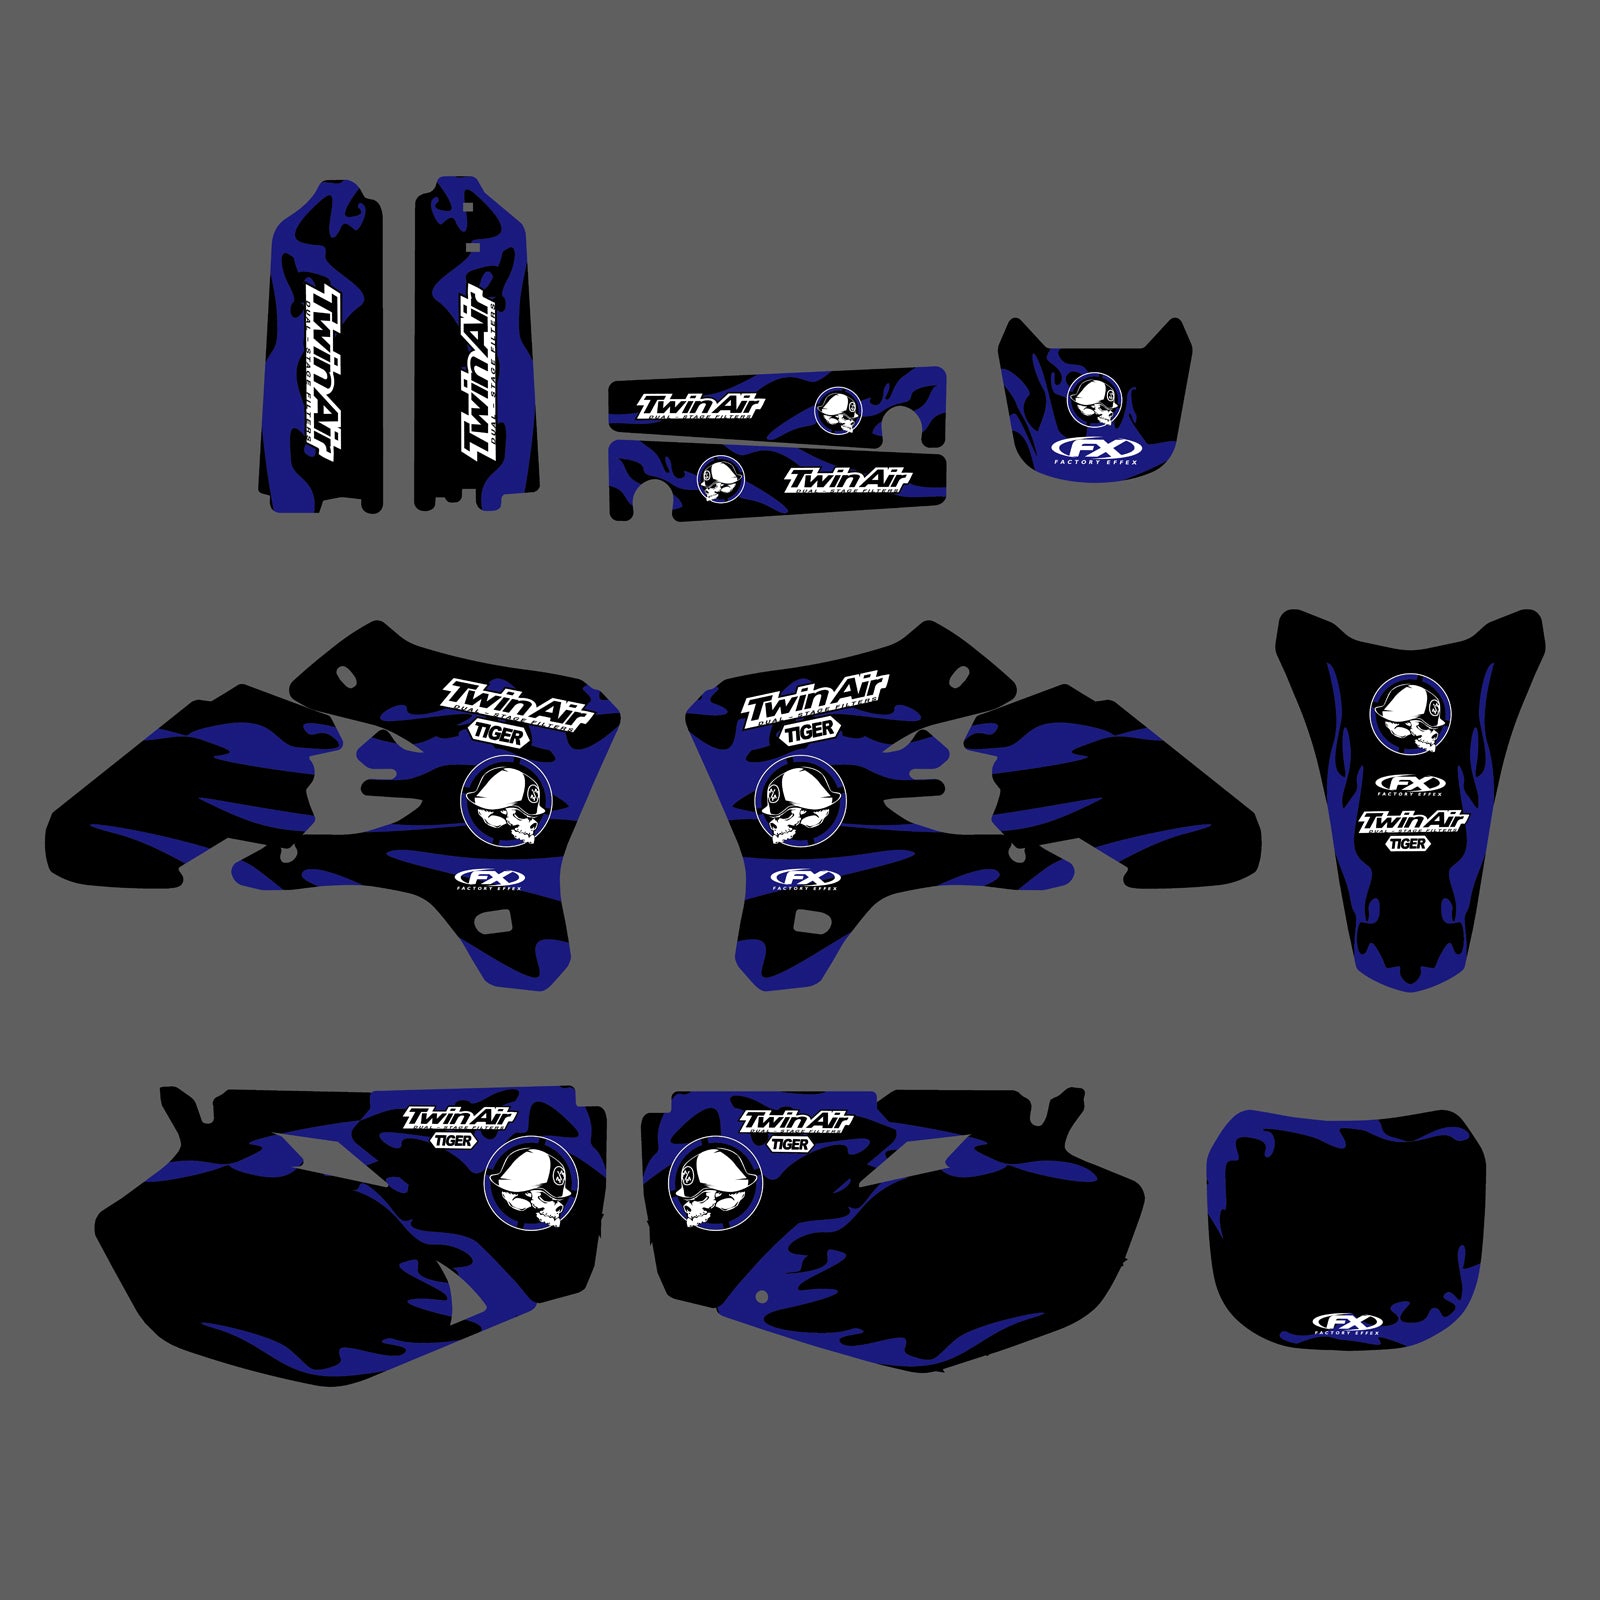 Motorcycle Team Graphic Background Decal Sticker Kit For YAMAHA YZF250/YZF450 2003-2005